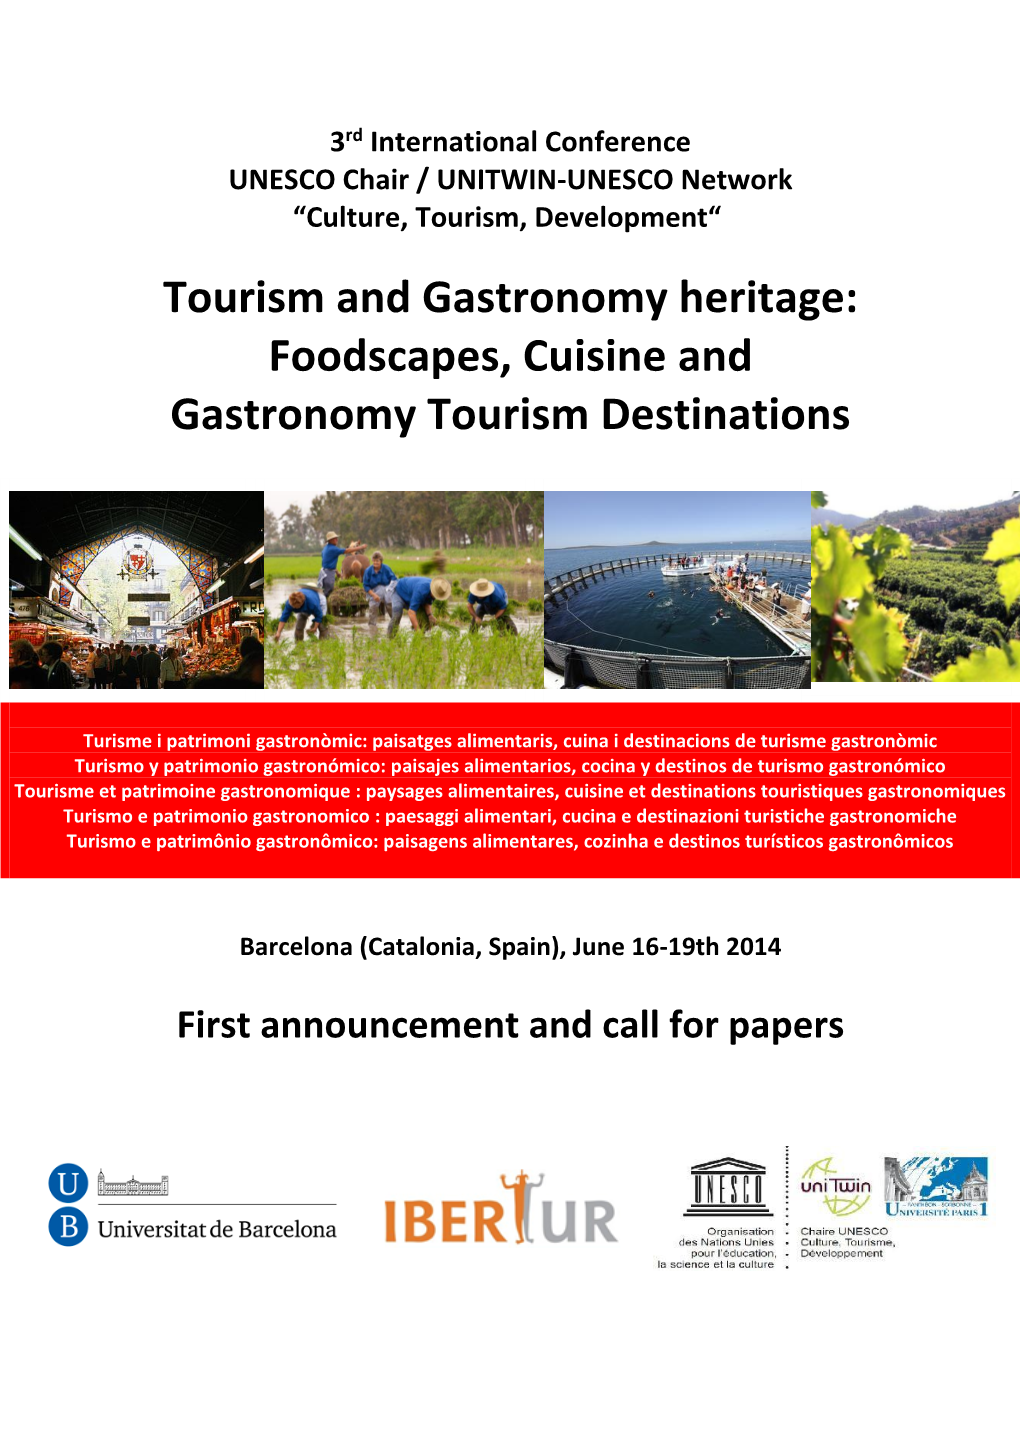 Tourism and Gastronomy Heritage: Foodscapes, Cuisine and Gastronomy Tourism Destinations